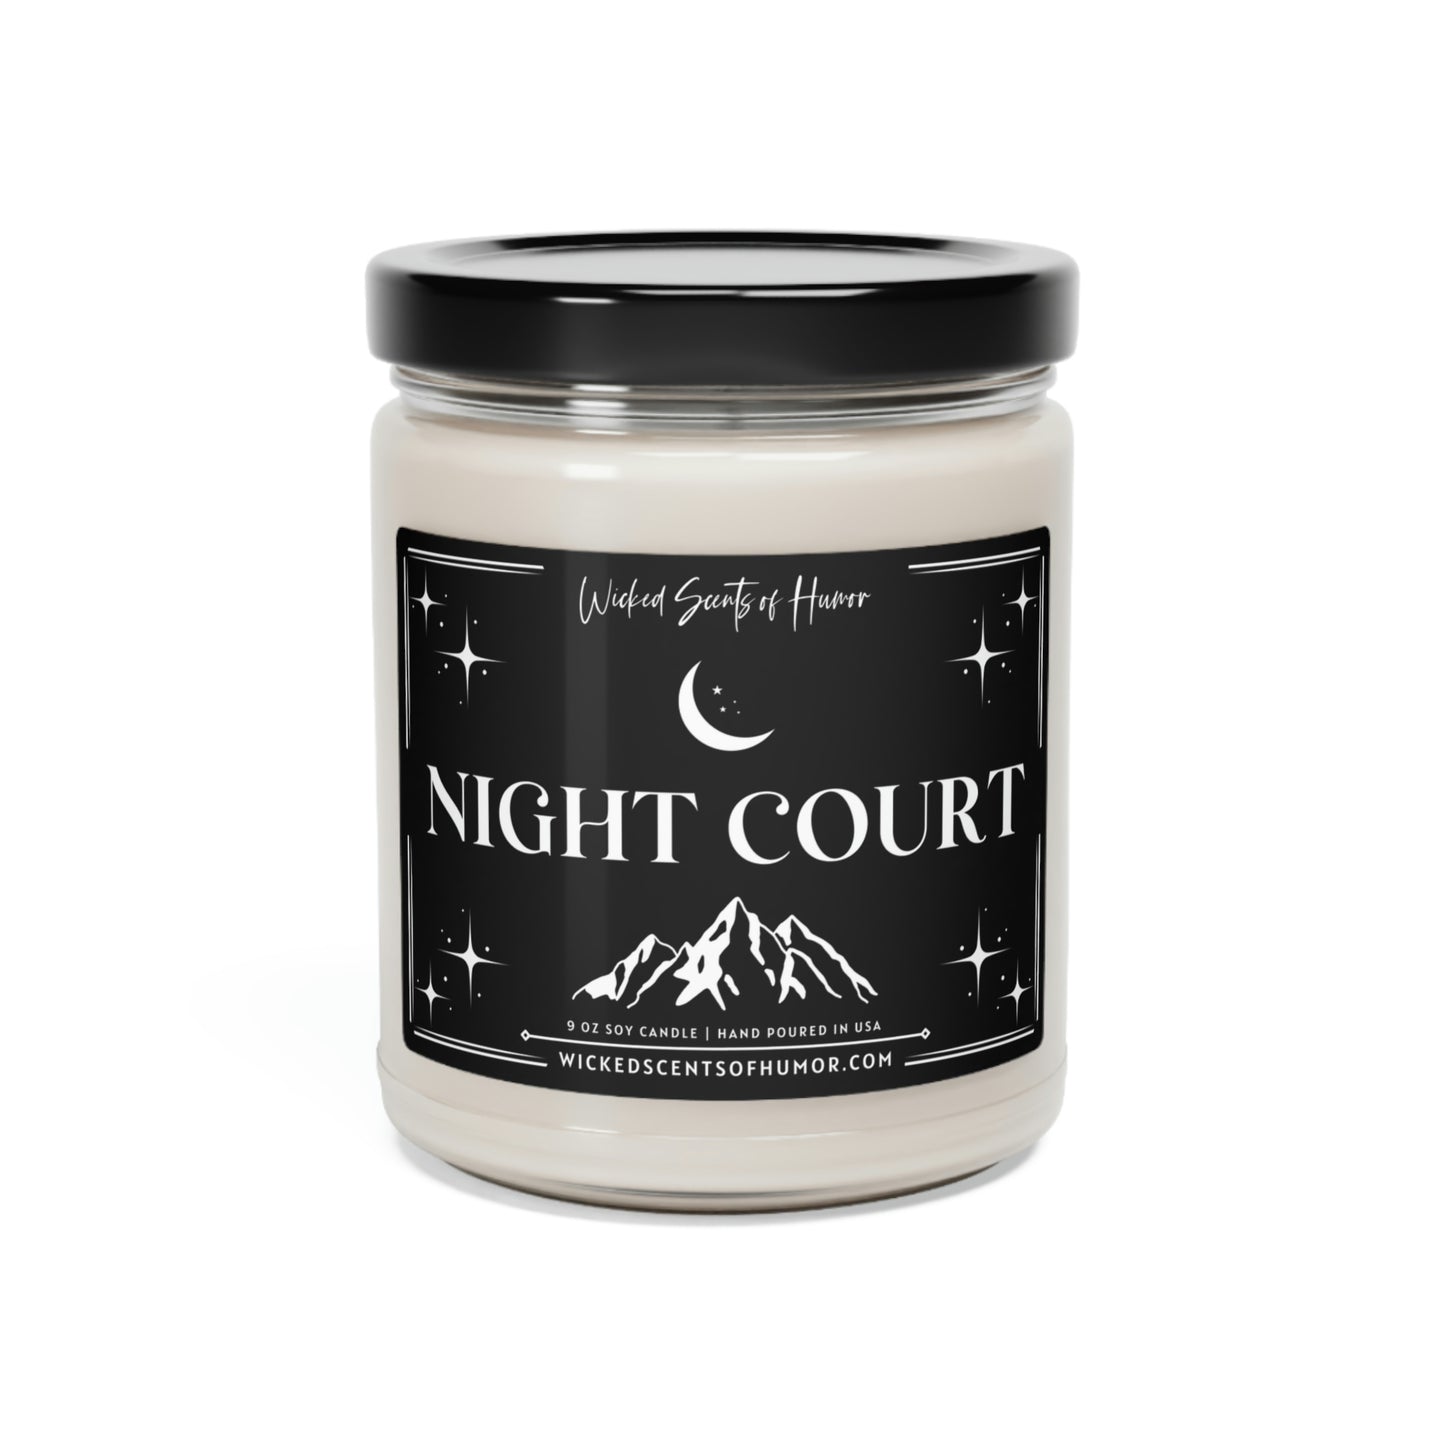 NIGHT COURT Soy Candle, acotar, acomaf, Book Lover Candle, Book Scented Candle, Literary Candle, Book Inspired Candle